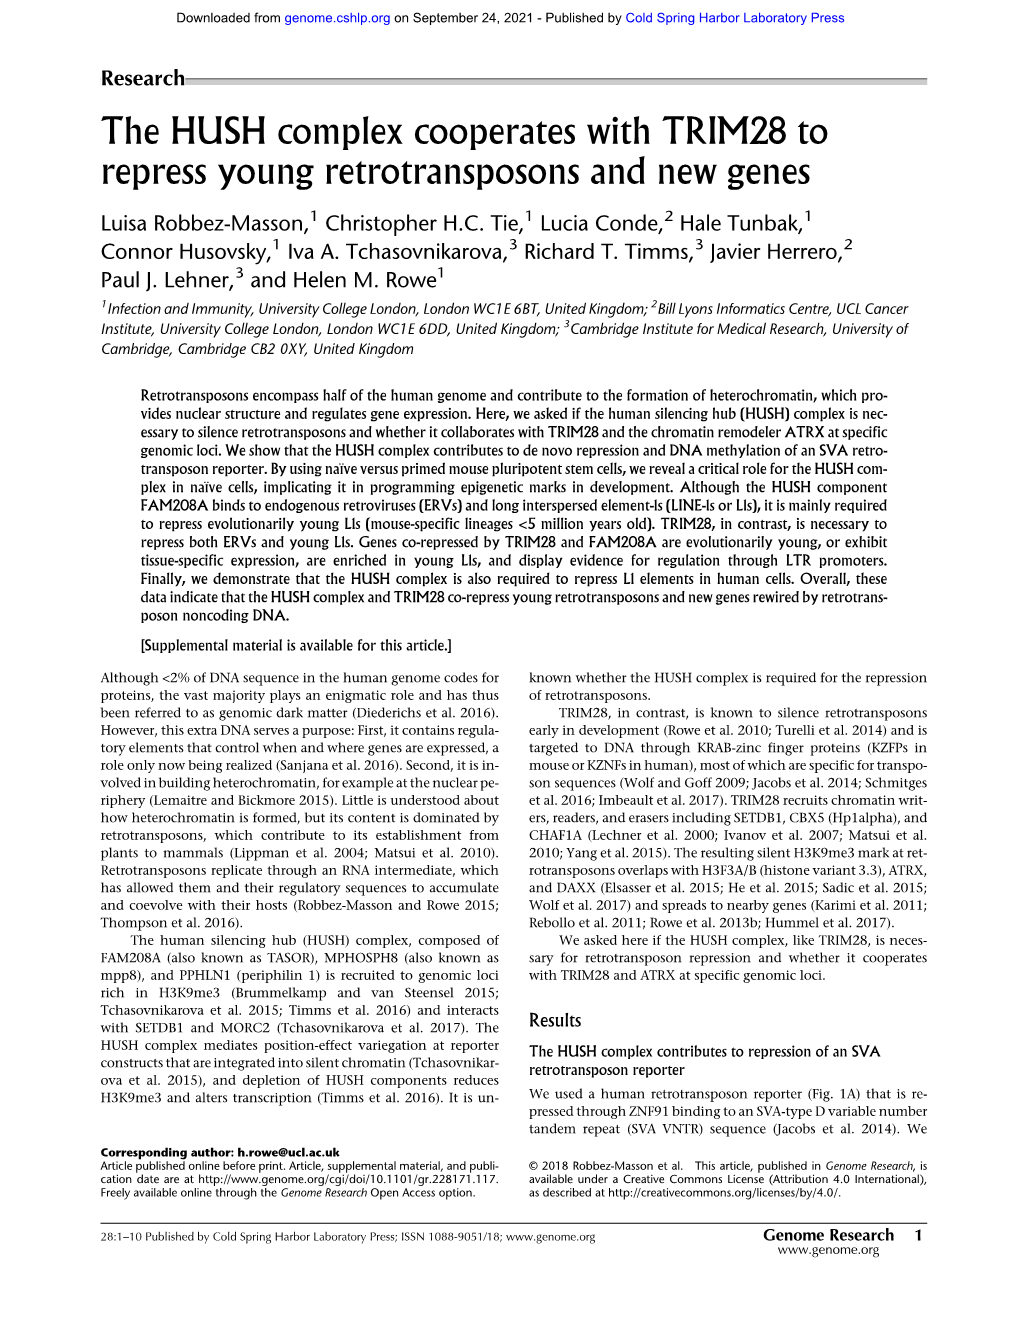 The HUSH Complex Cooperates with TRIM28 to Repress Young Retrotransposons and New Genes